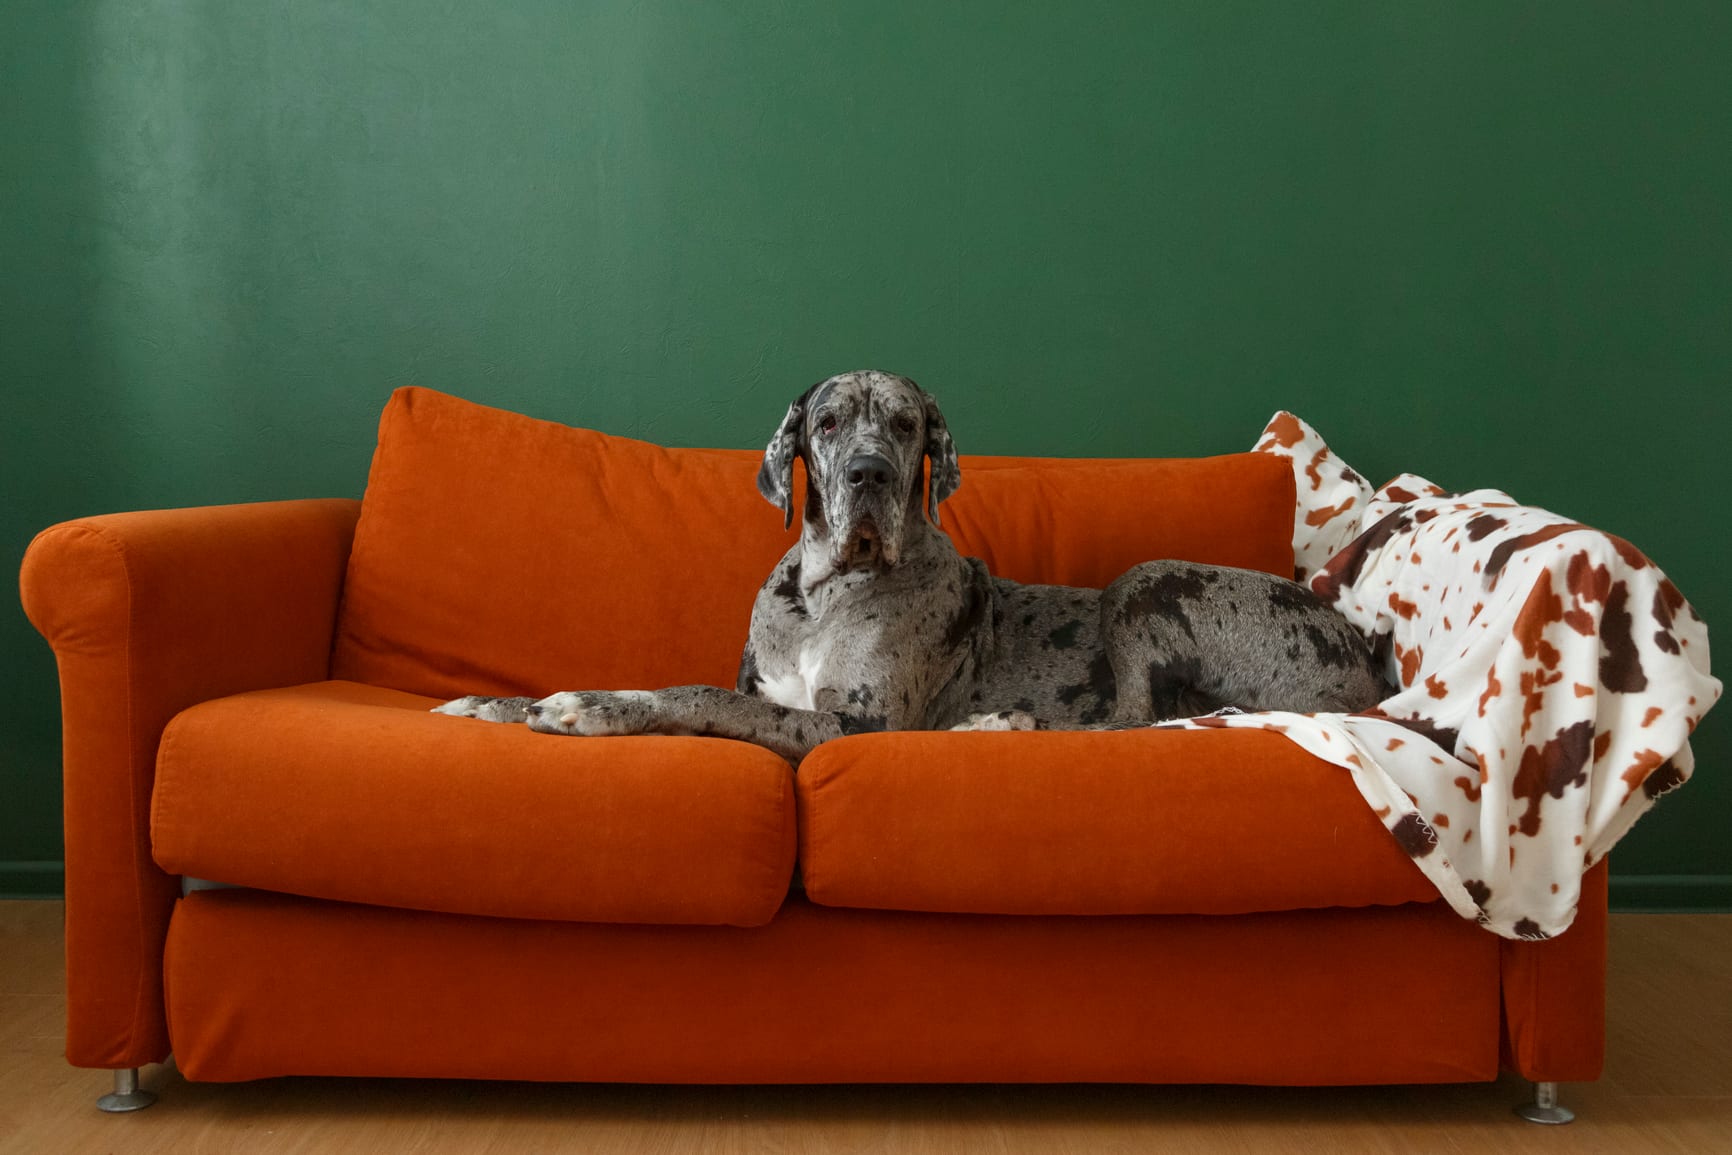 Loyal Great Dane dog lying on orange couch near blanket and looking at camera against bright green wall at home